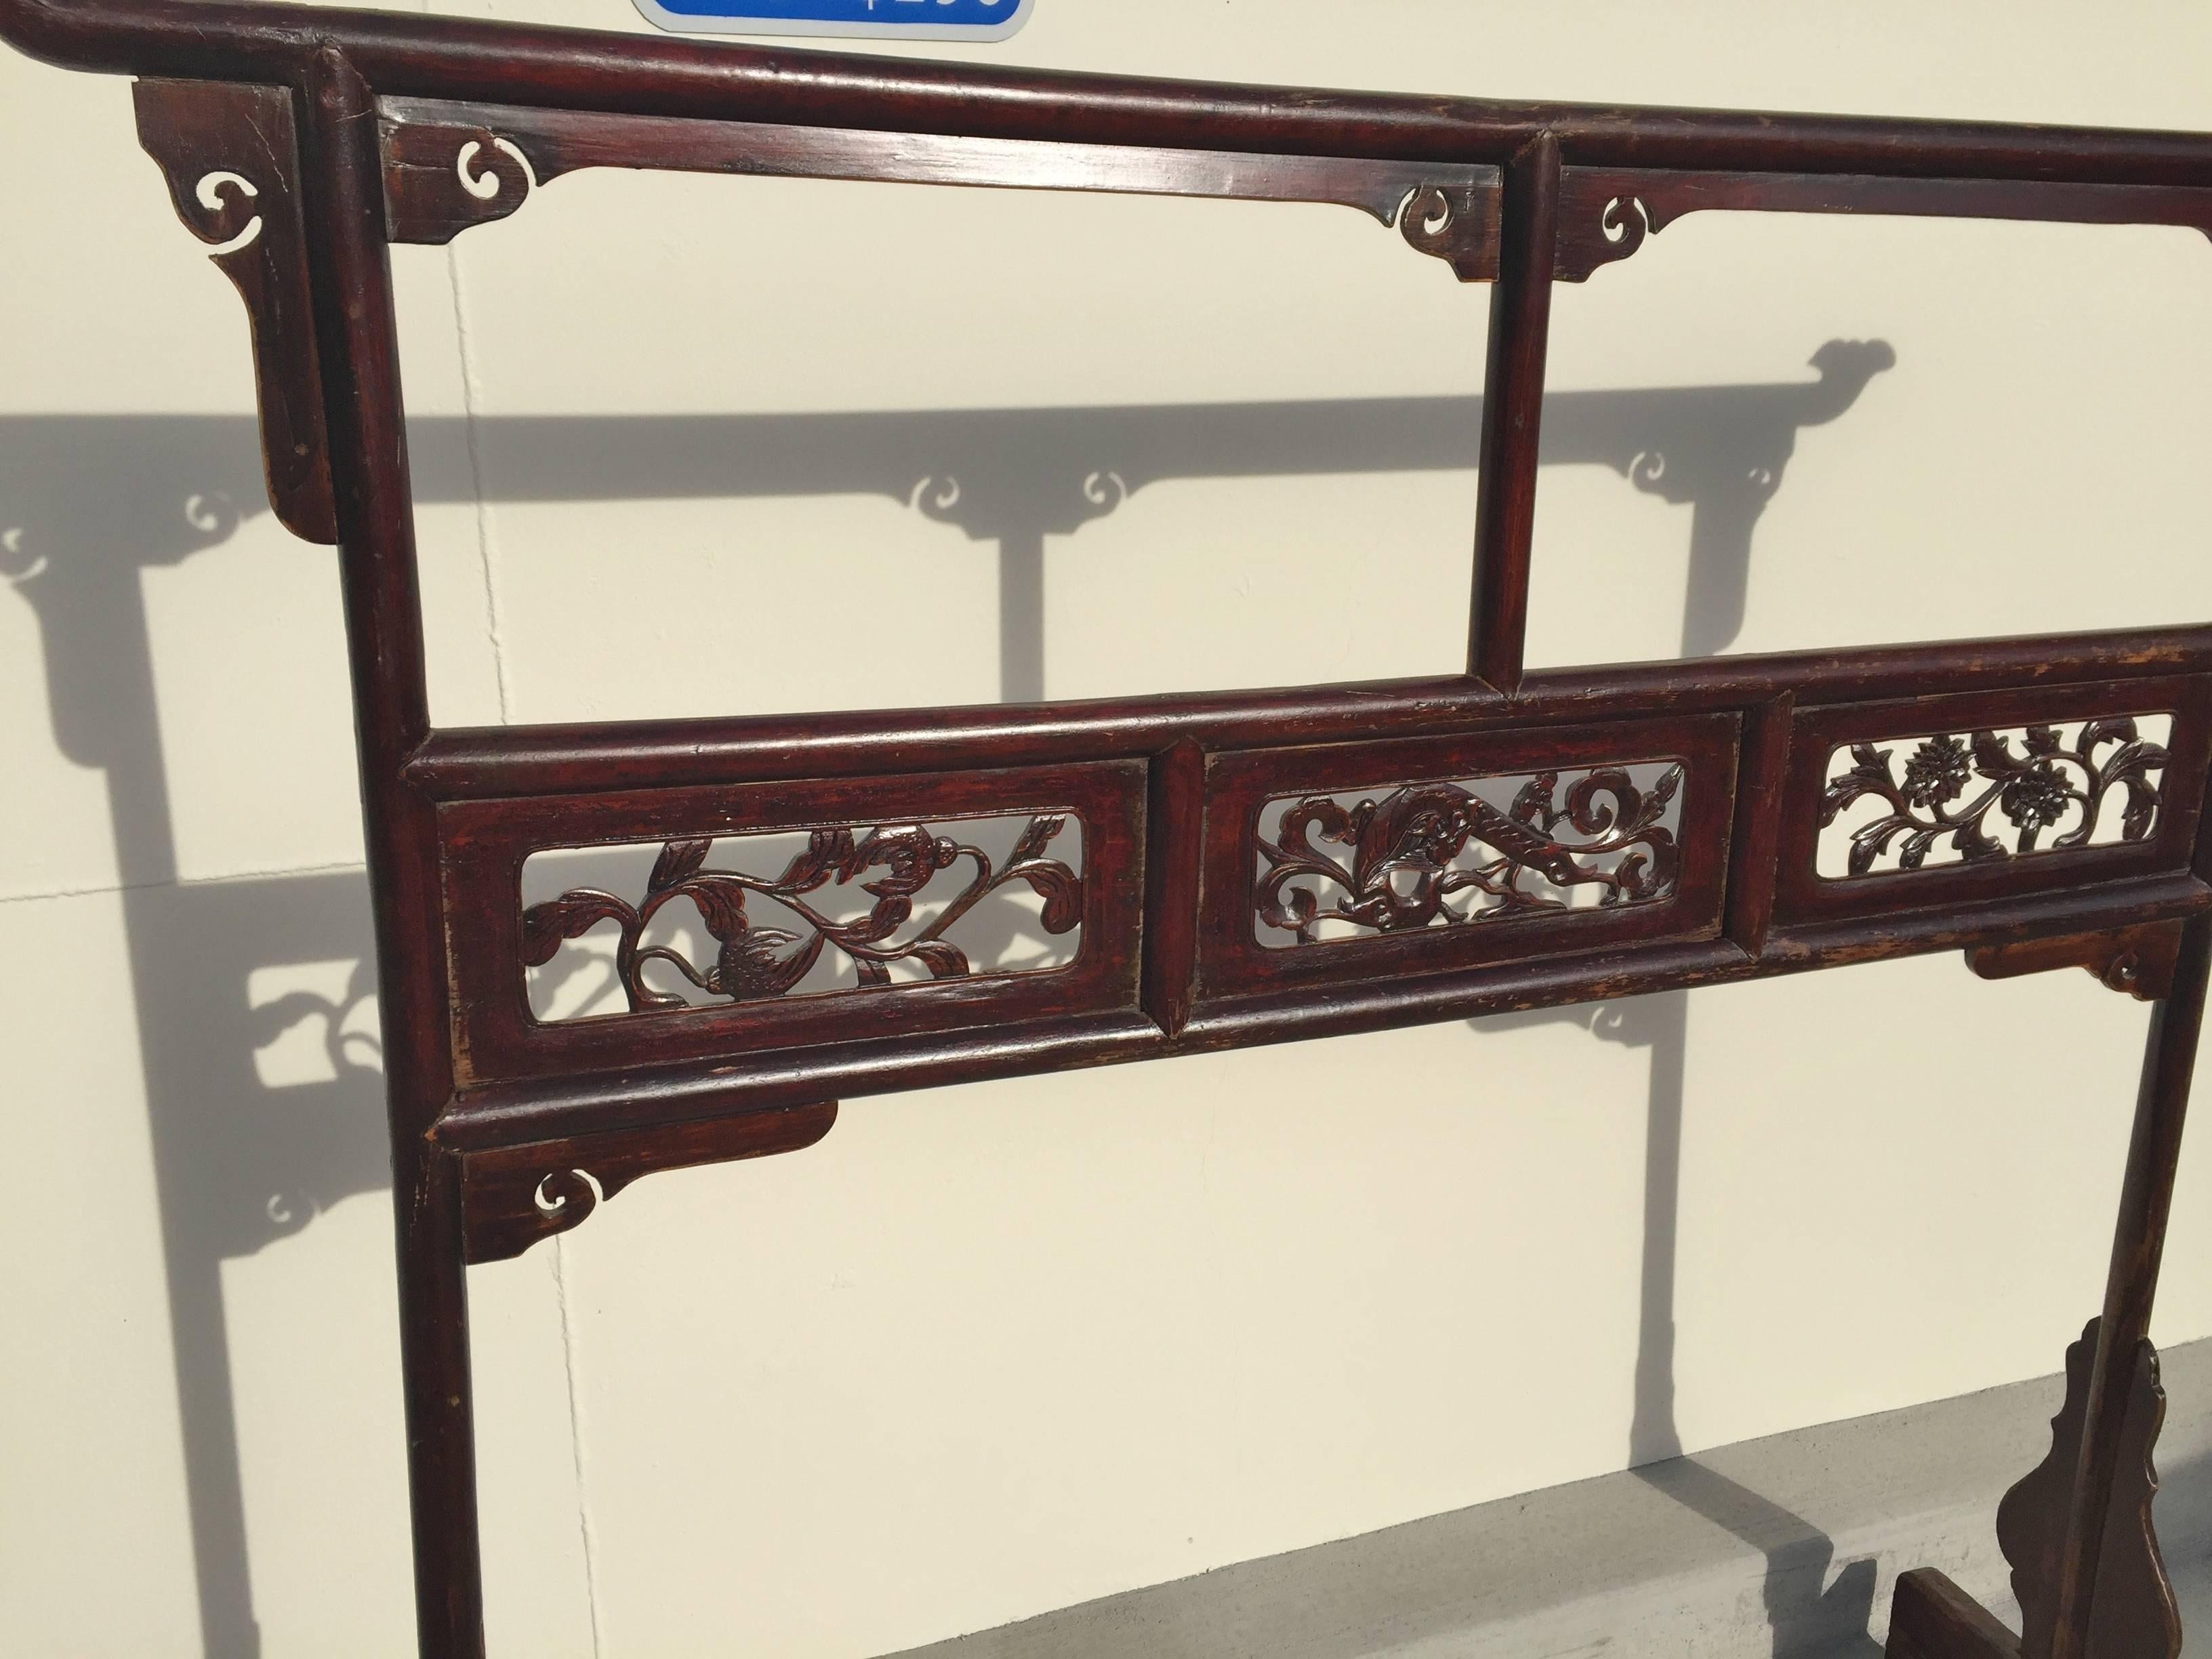 The garment rack is an unique piece of furniture used by the Chinese nobleman and noblewoman. Typically placed in a bedroom, it holds the robes they wear.

This beautiful piece features carved panels depicting flowers and water dragon. Delicate